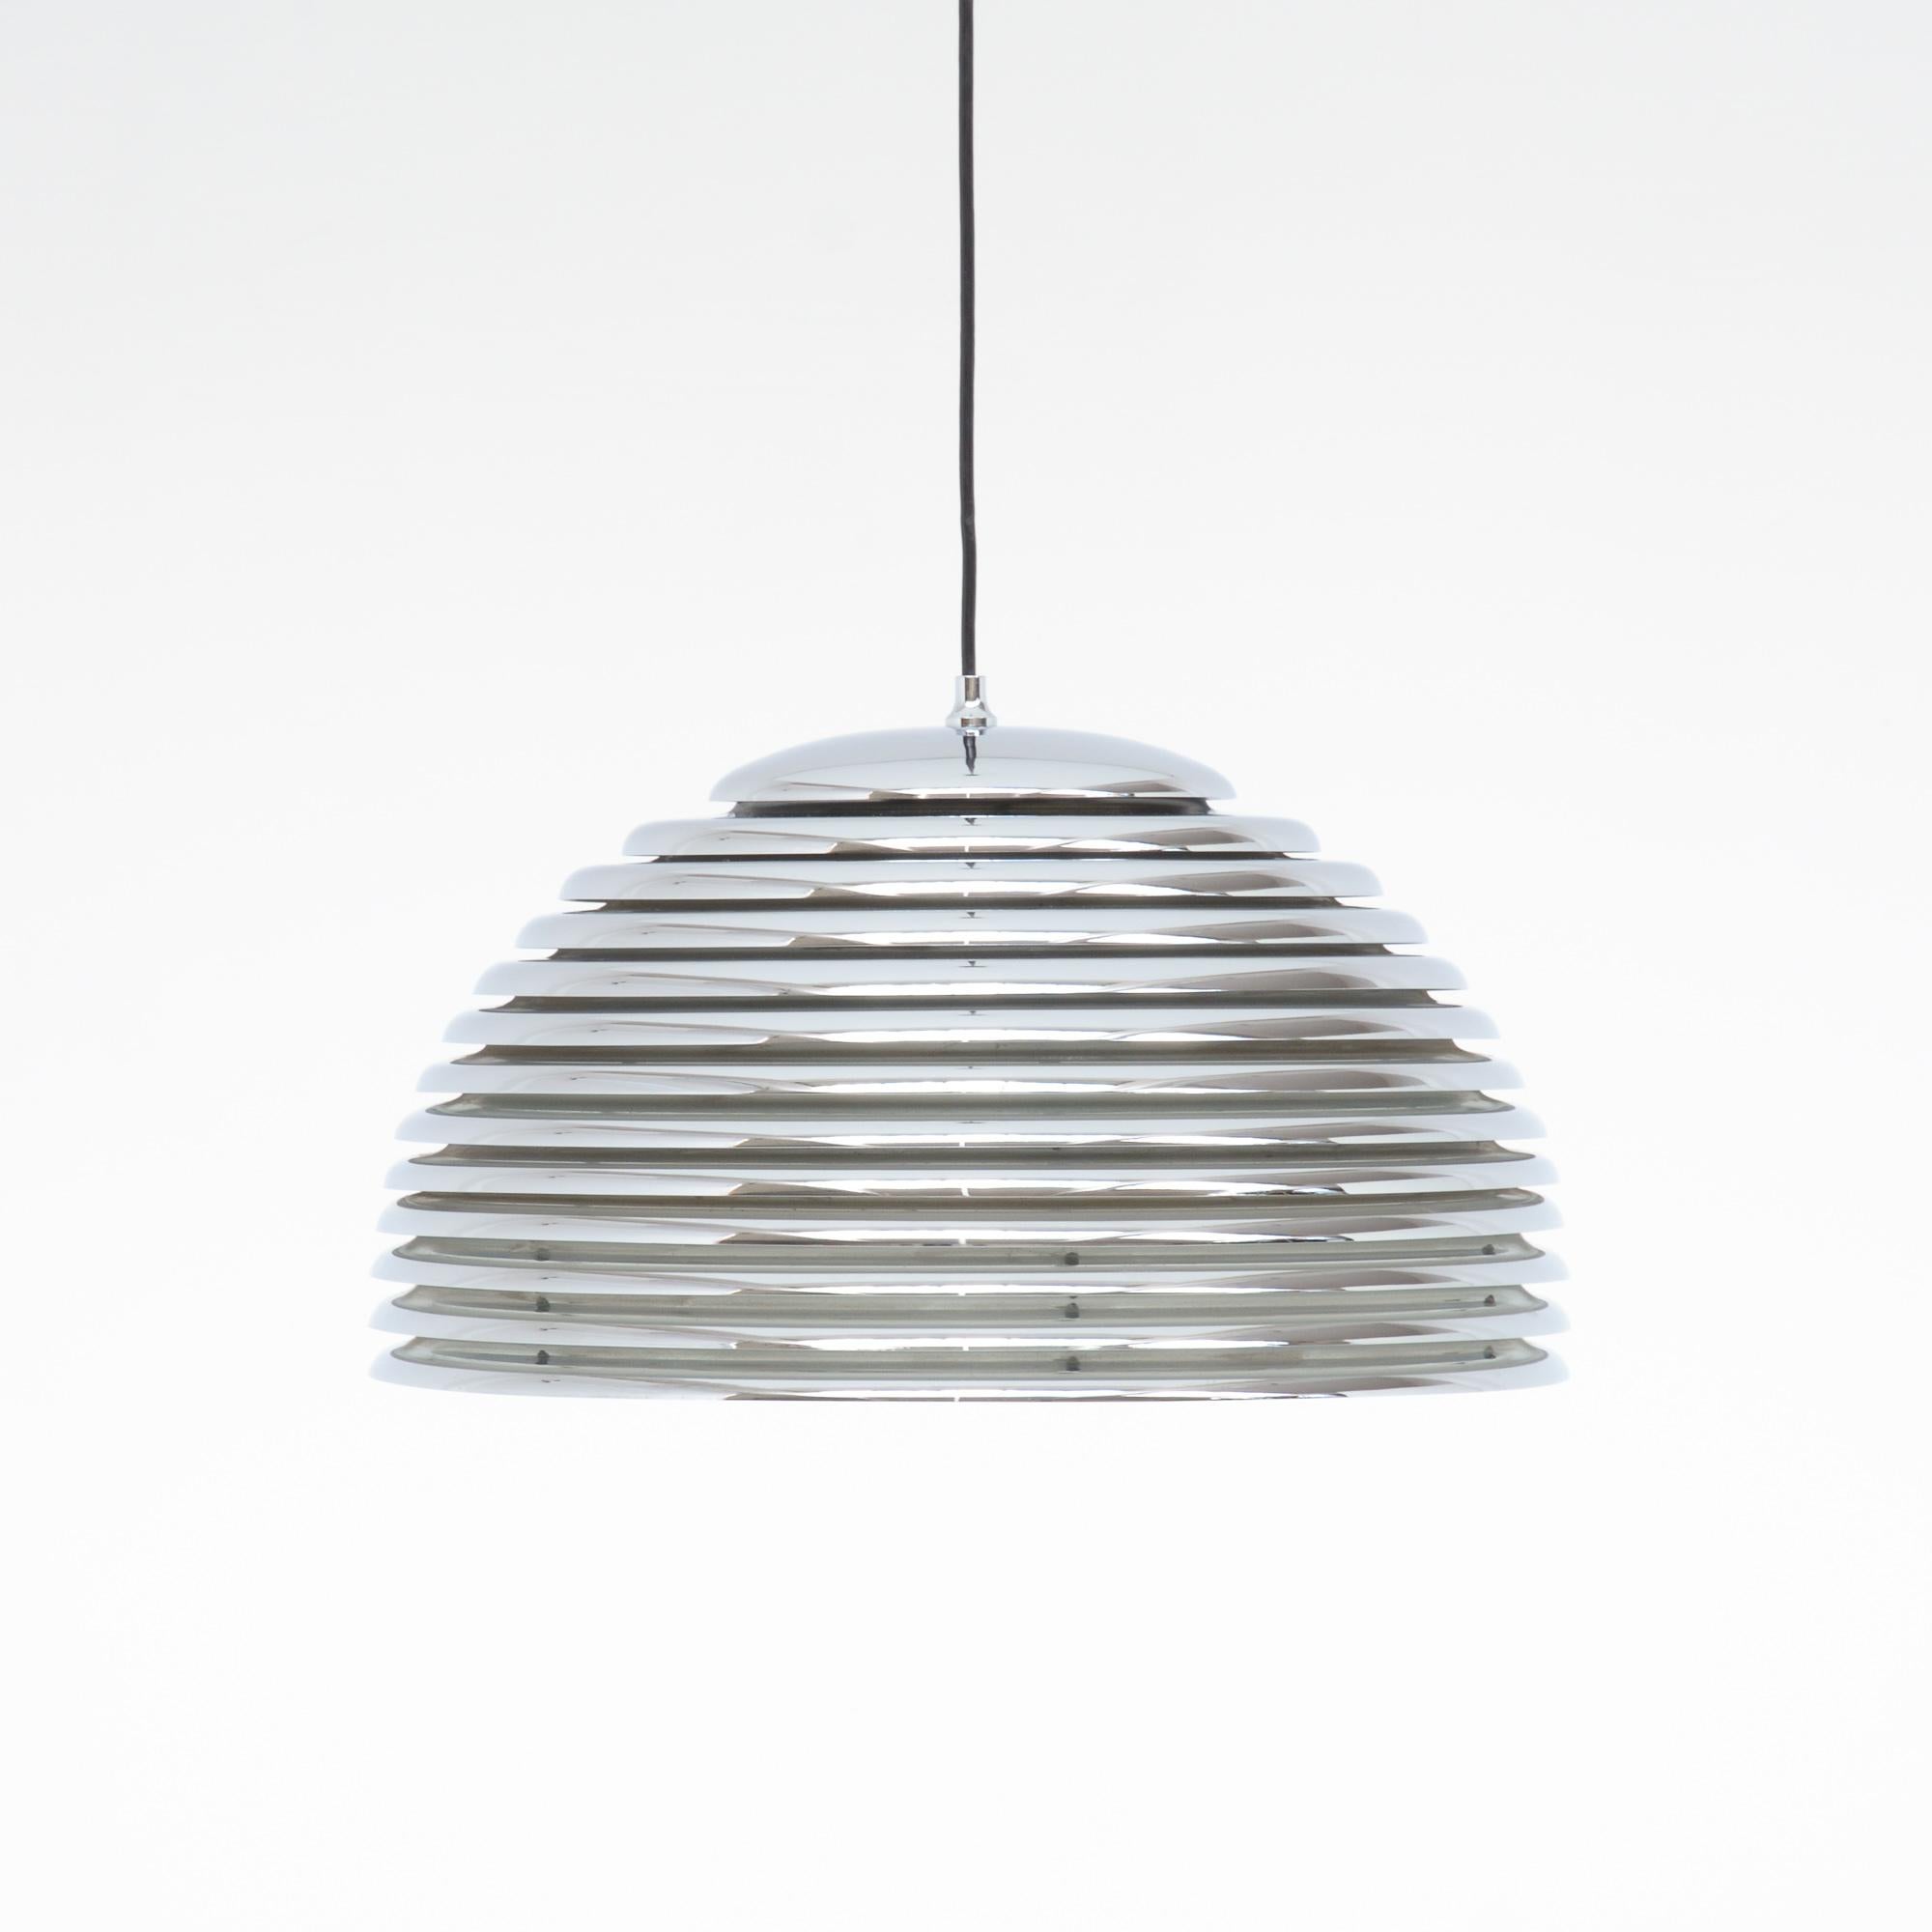 The Saturno pendant lamp was designed by Kazuo Motozawa for Staff Leuchten, in Germany, 1972.
The dome shade is made of chromed metal rings, white lacquered inside. The Saturno pendant lamp creates the perfect light above a dining table.
This lamp